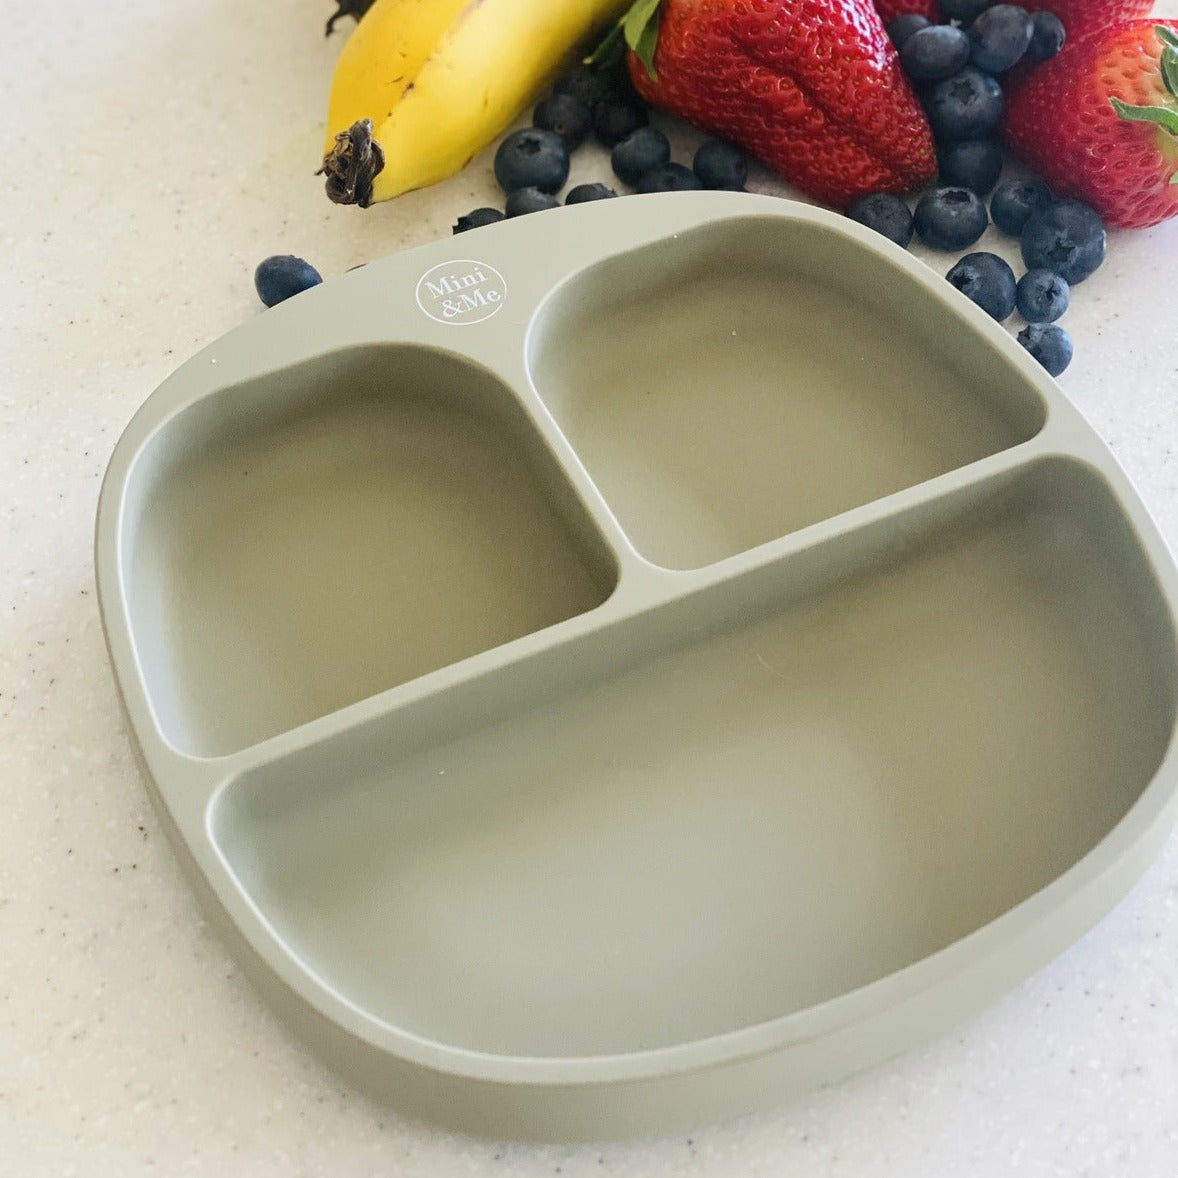 Mini and Me Divider Silicone Plate - Olive